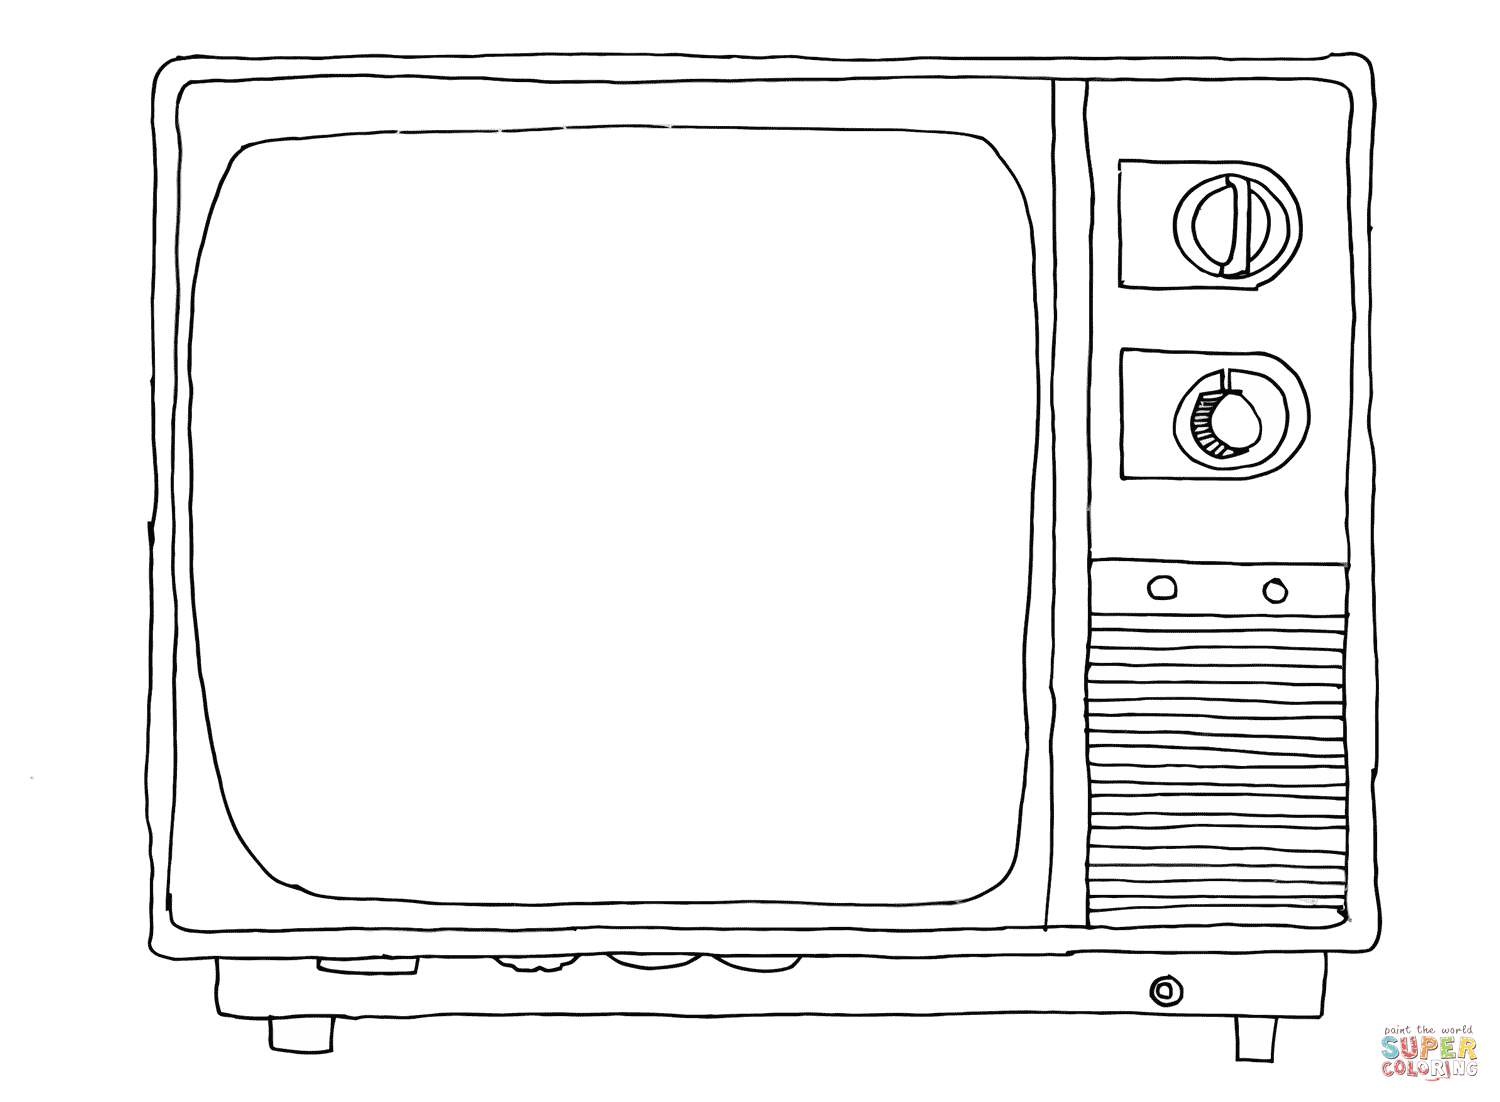 Old Sytle Tv Coloring Page   Free Printable Coloring Pages ...